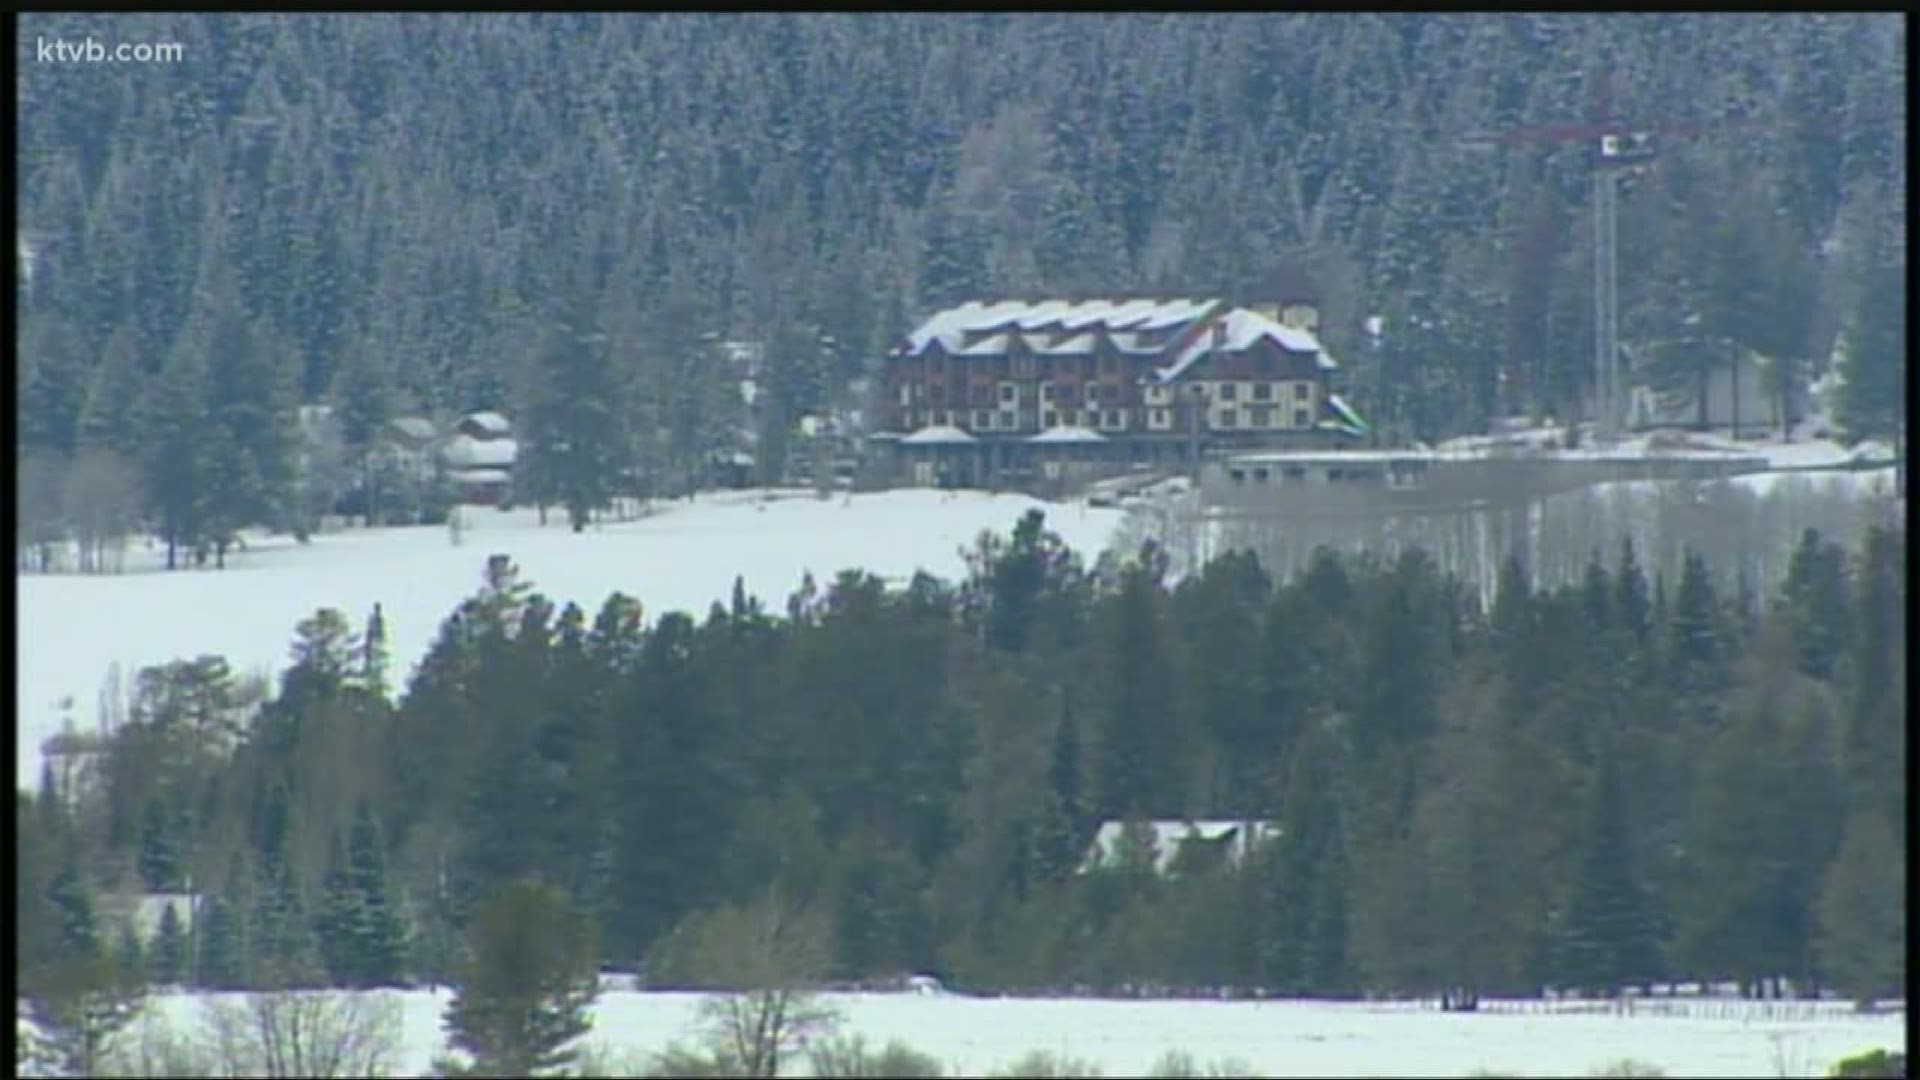 Mark Johnson tells us what this announcement could mean for skiers and the town of Donnelly.